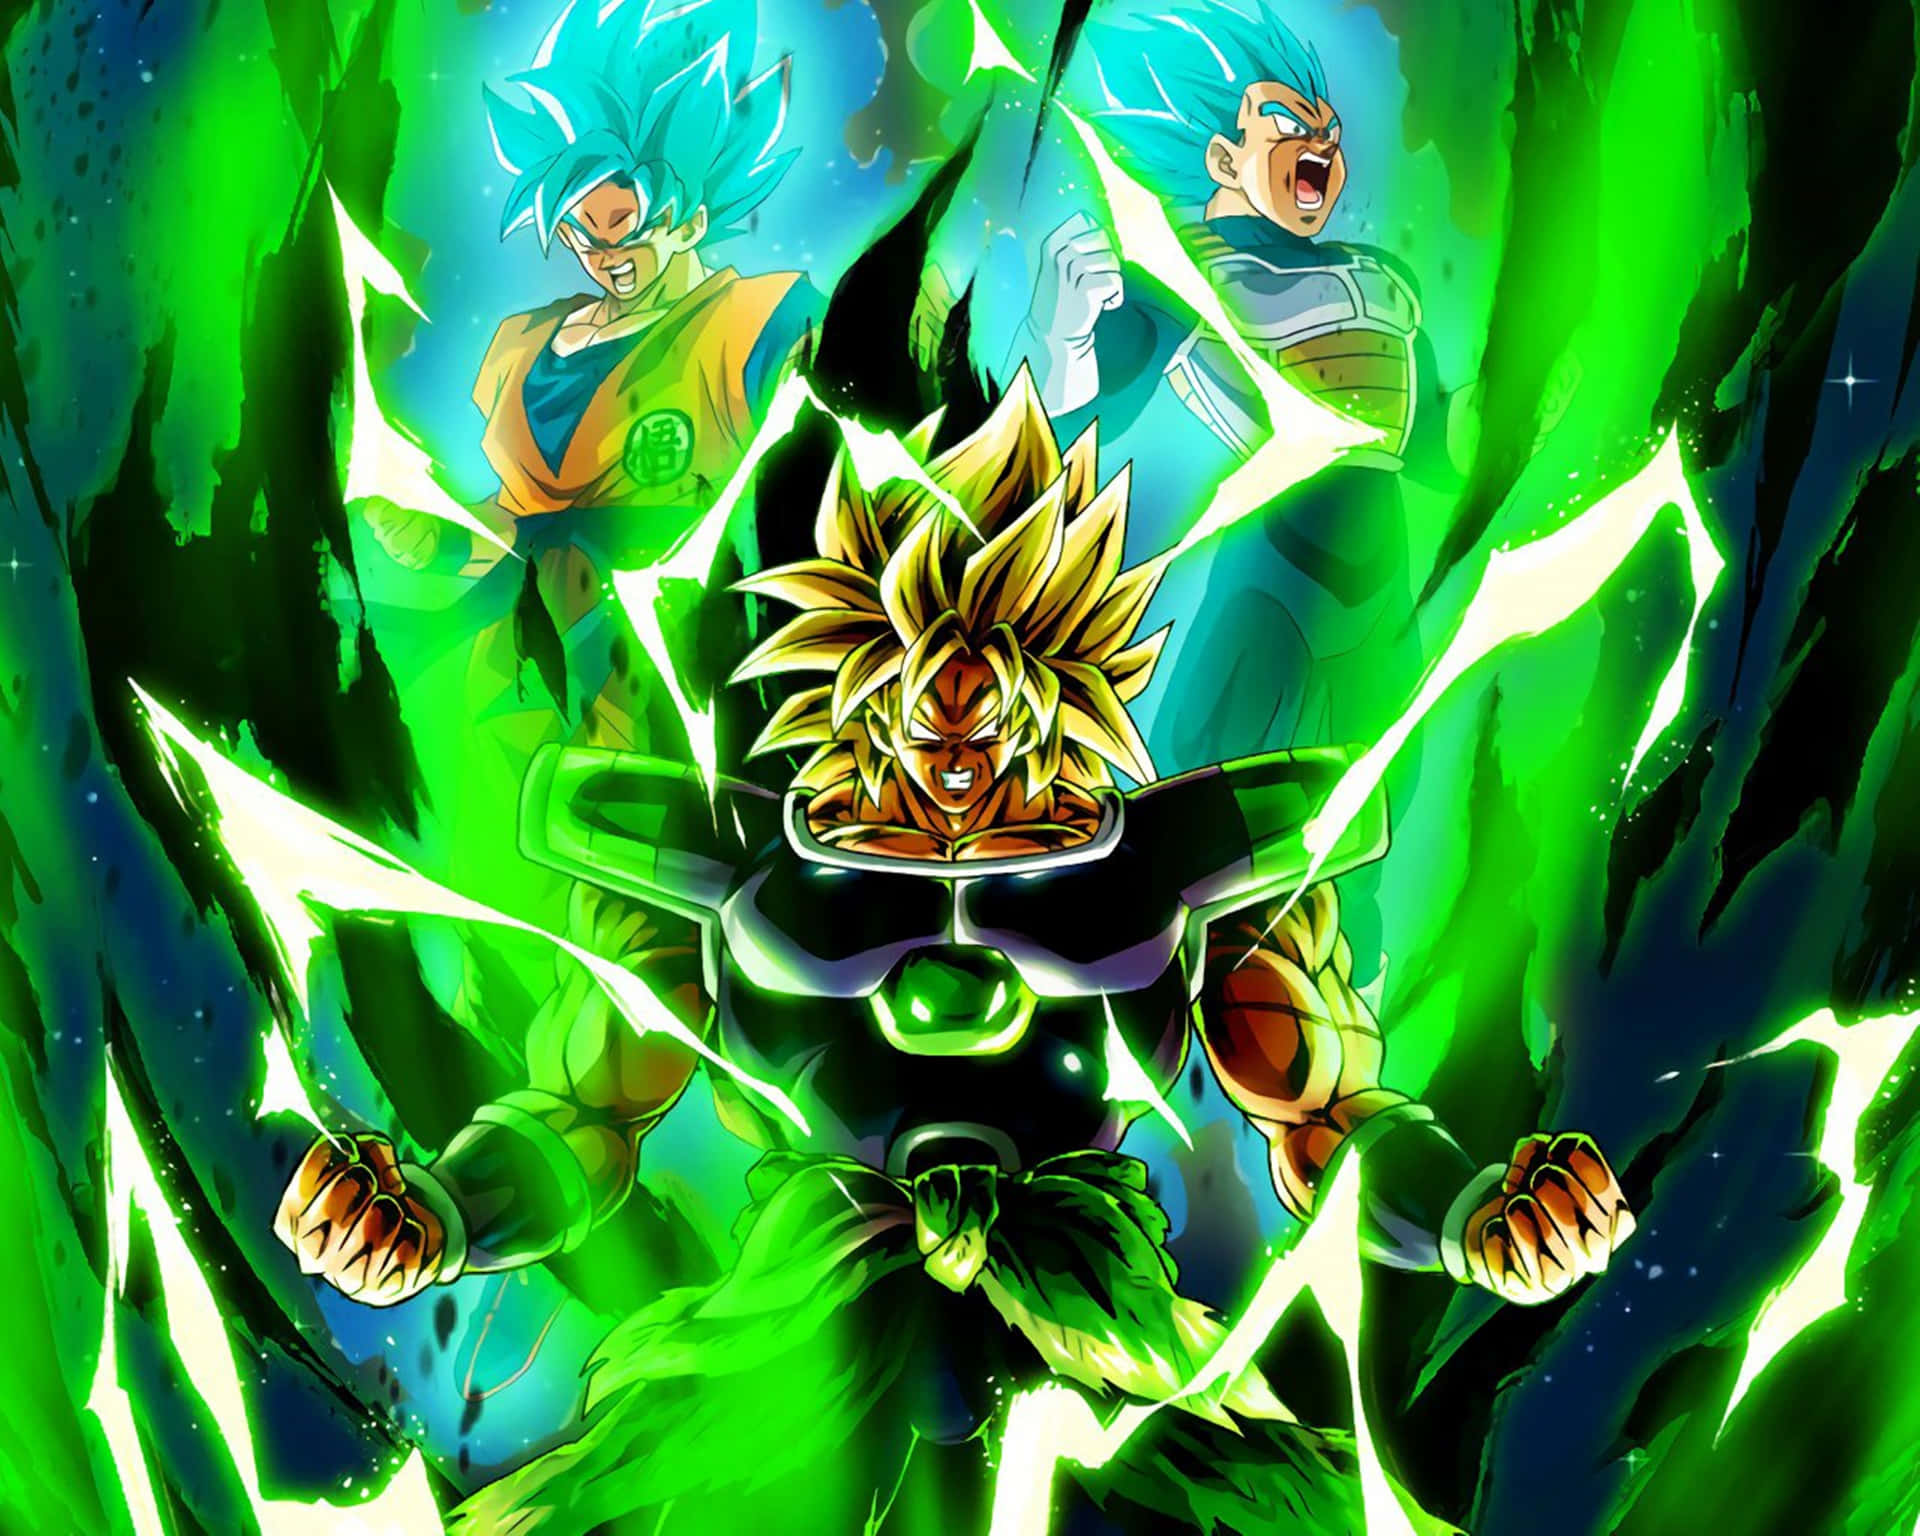 "Witness the power of the Legendary Super Saiyan, Broly!” Wallpaper